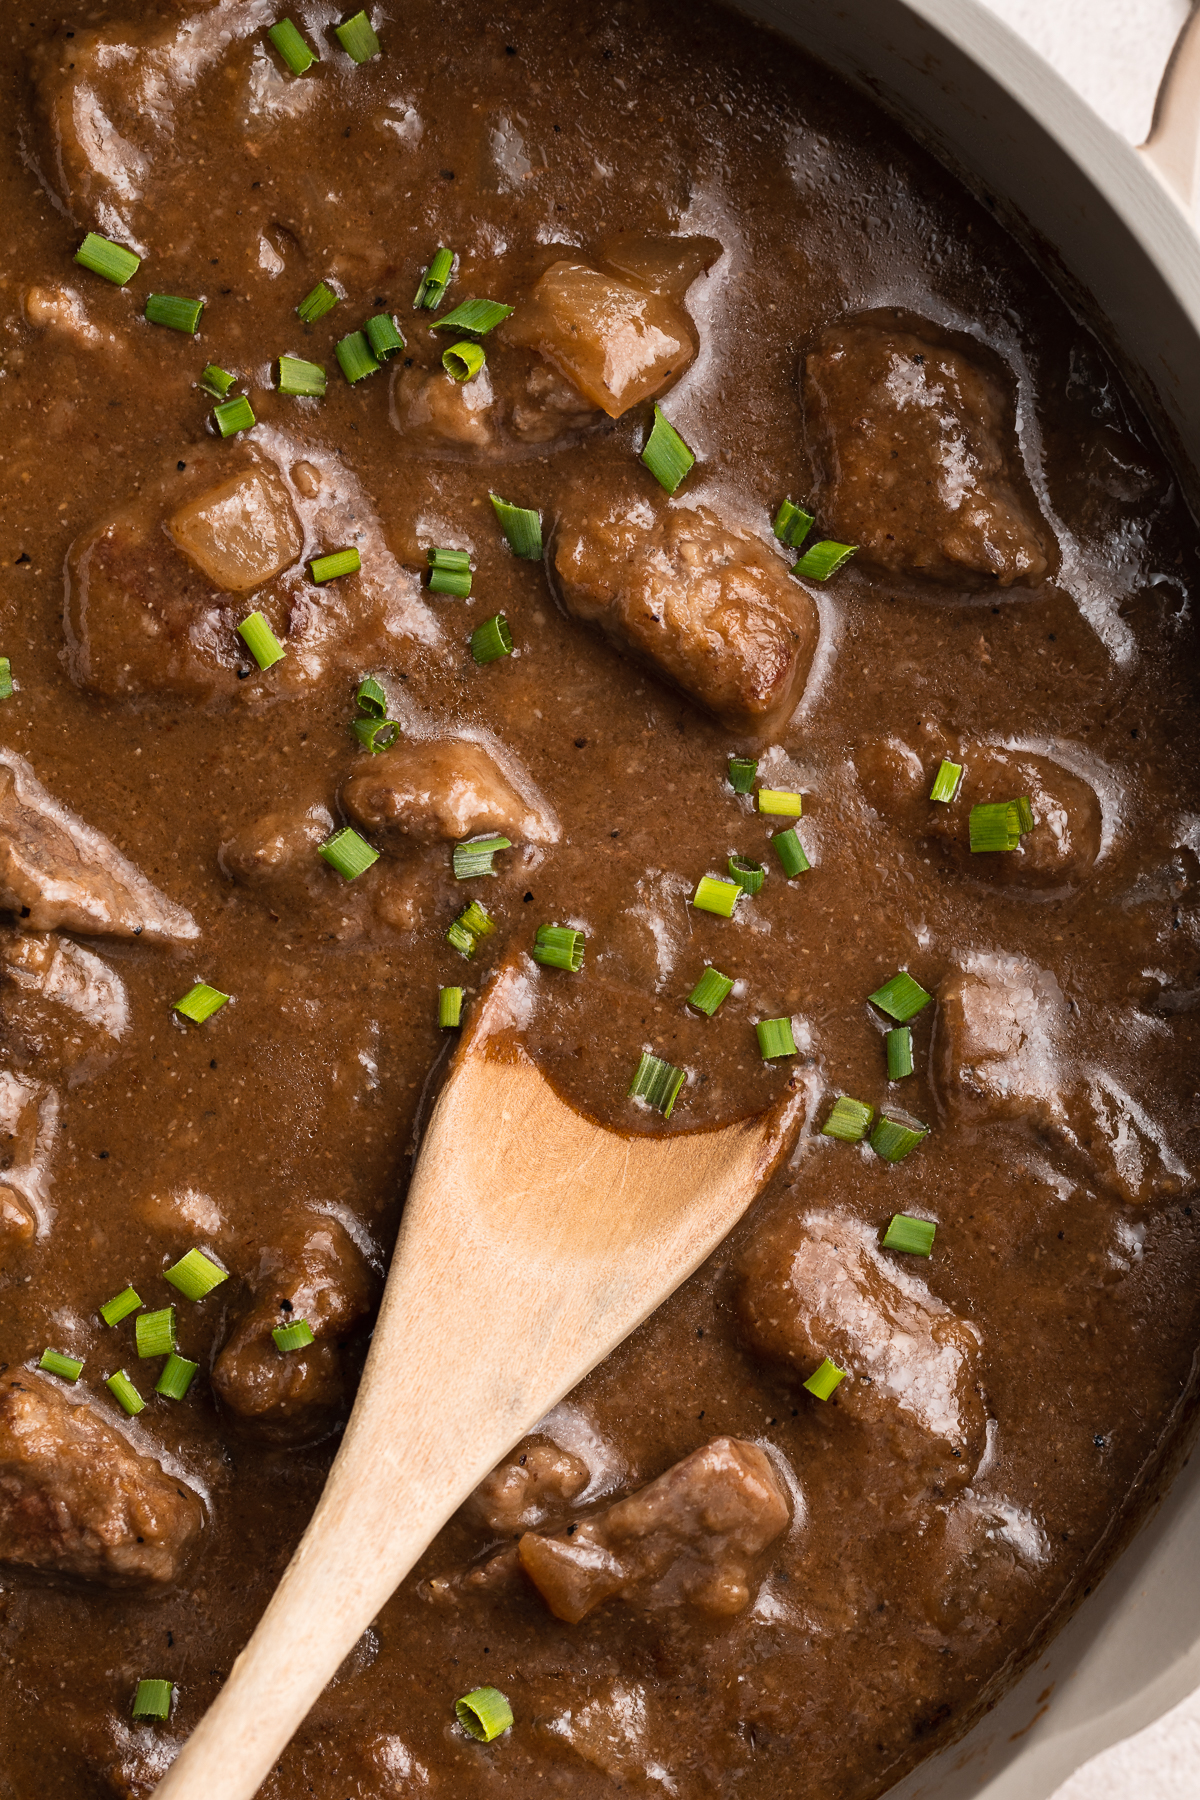 Overhead view of a large skillet holding cook beef tips and rich dark gravy.